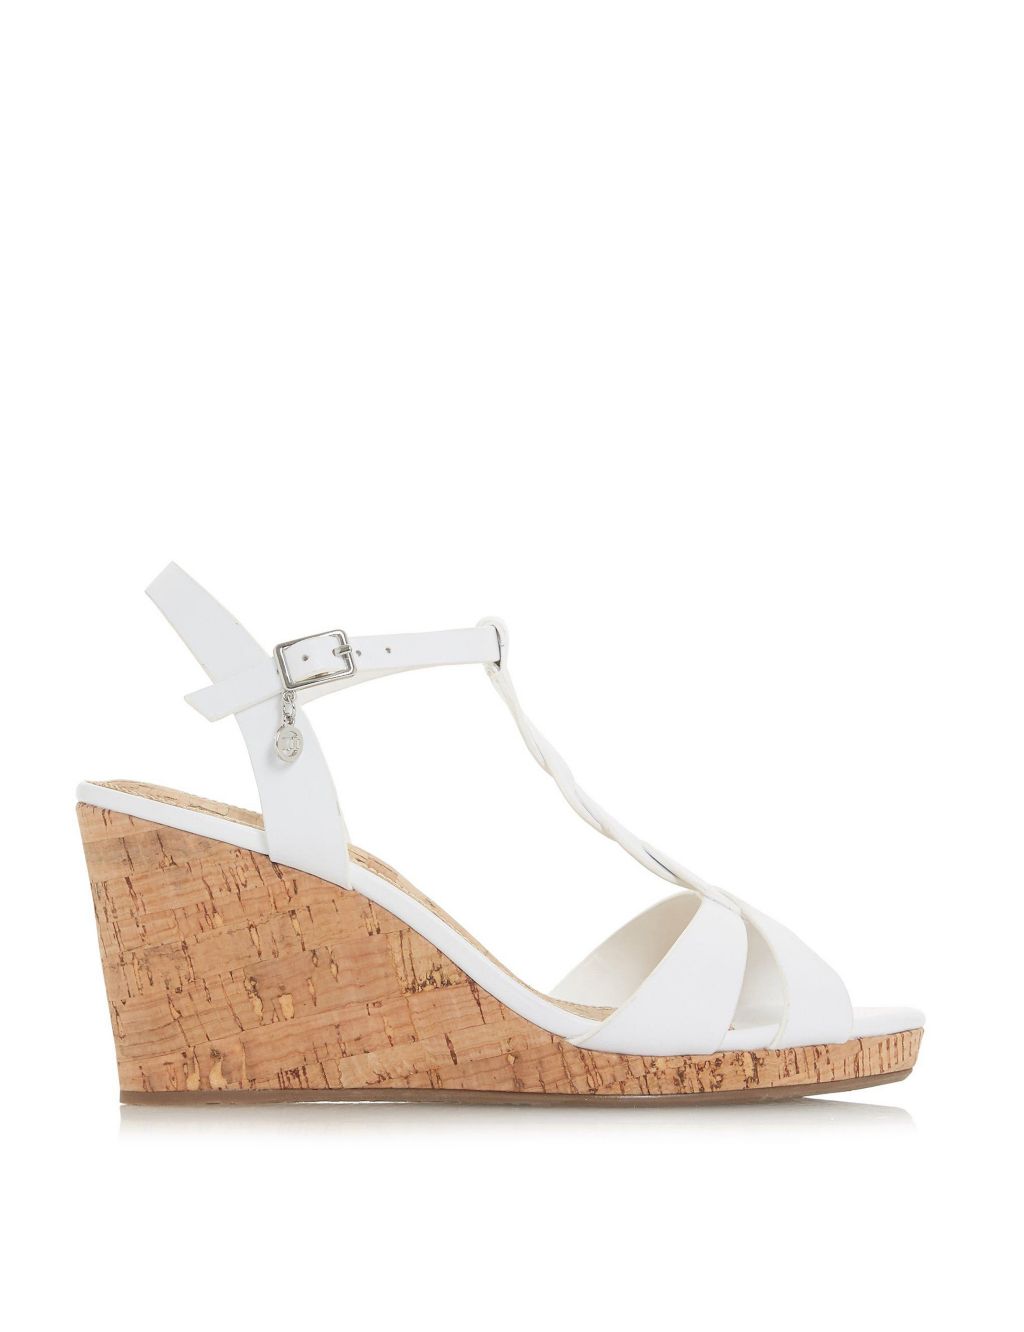 Leather T Bar Wedge Sandals image 1